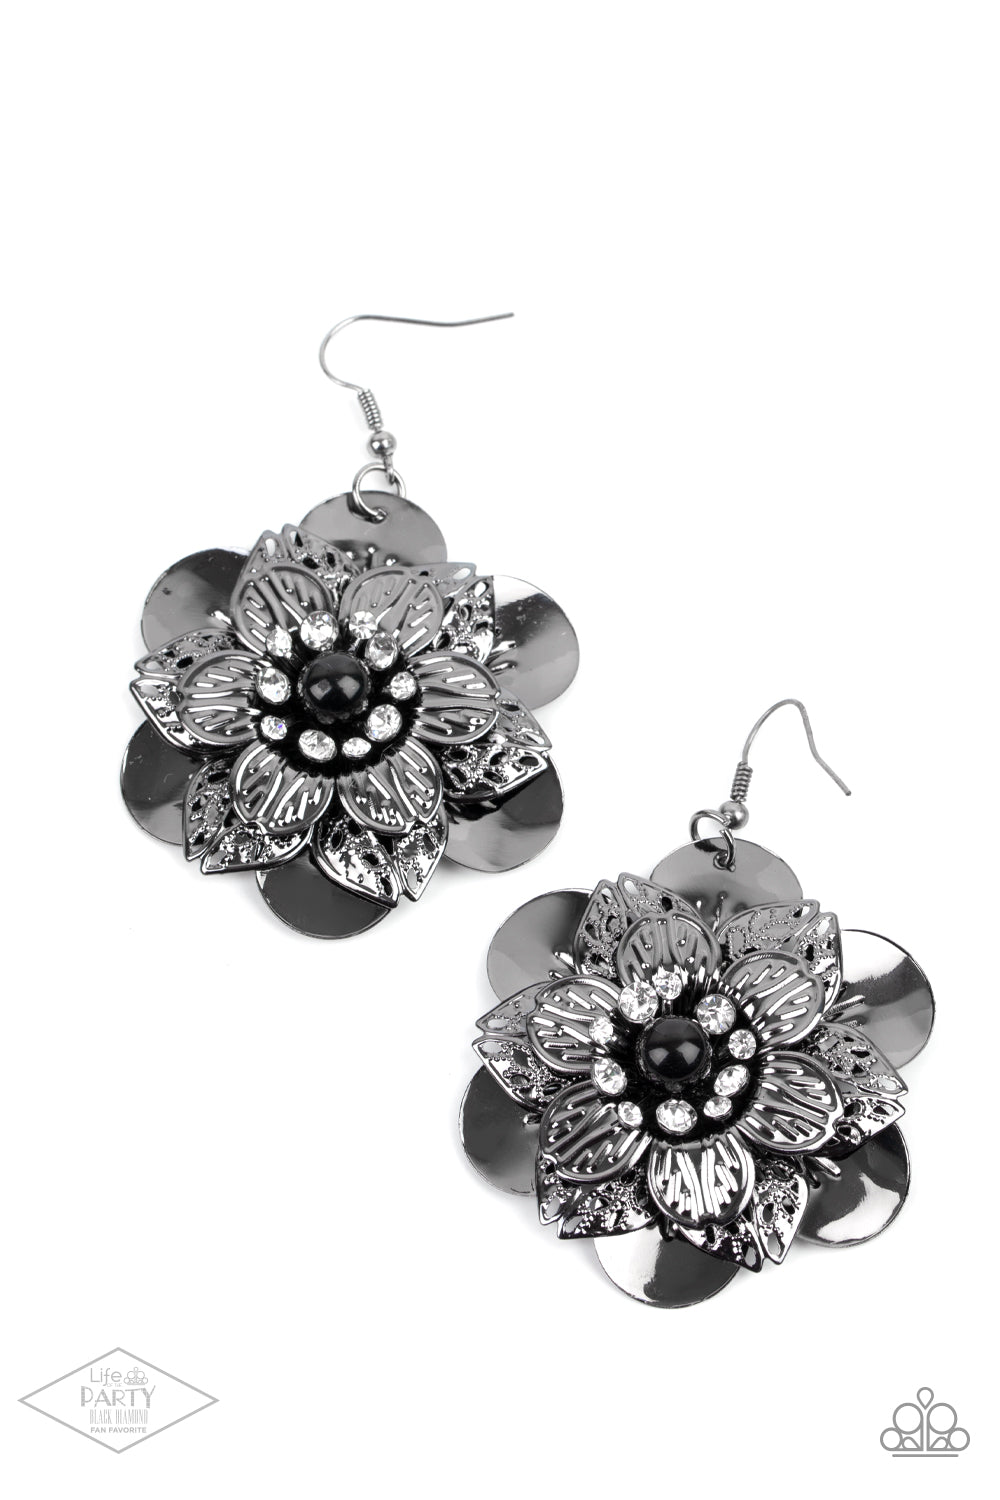 Midnight Garden Black Flower Earring - Paparazzi Accessories. Sleek gunmetal petals with a variety of textures are layered to create a dramatic flower. A single black bead bordered by a ring of rhinestones anchors the design while adding unmatched sparkle.  All Paparazzi Accessories are lead free and nickel free!  Sold as one pair of earrings. This Fan Favorite is back in the spotlight at the request of our 2020 Life of the Party member with Black Diamond Access, Monica C.